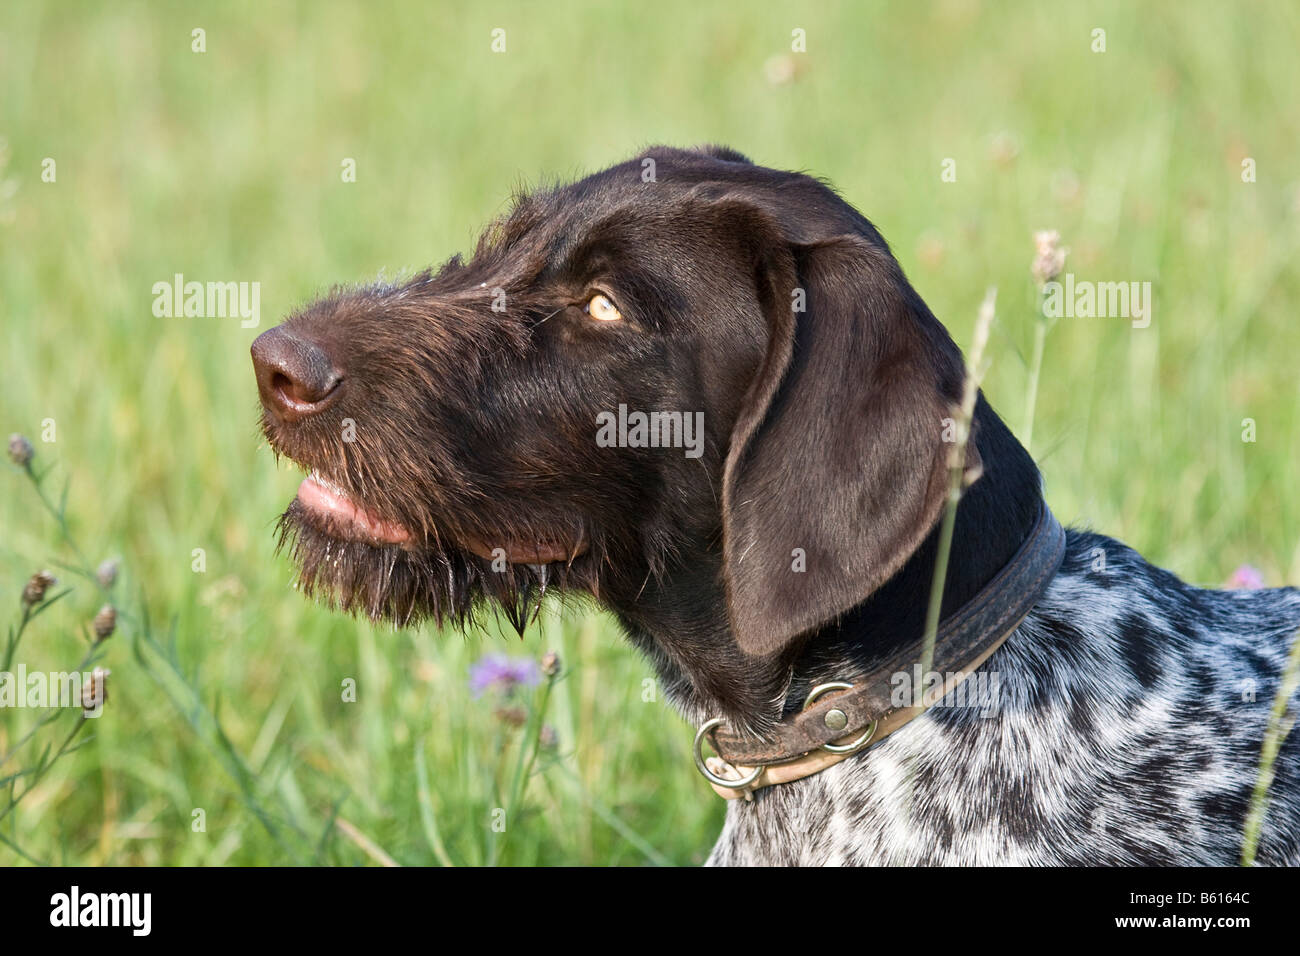 German Wirehaired Pointer, hunting dog, portrait Stock Photo